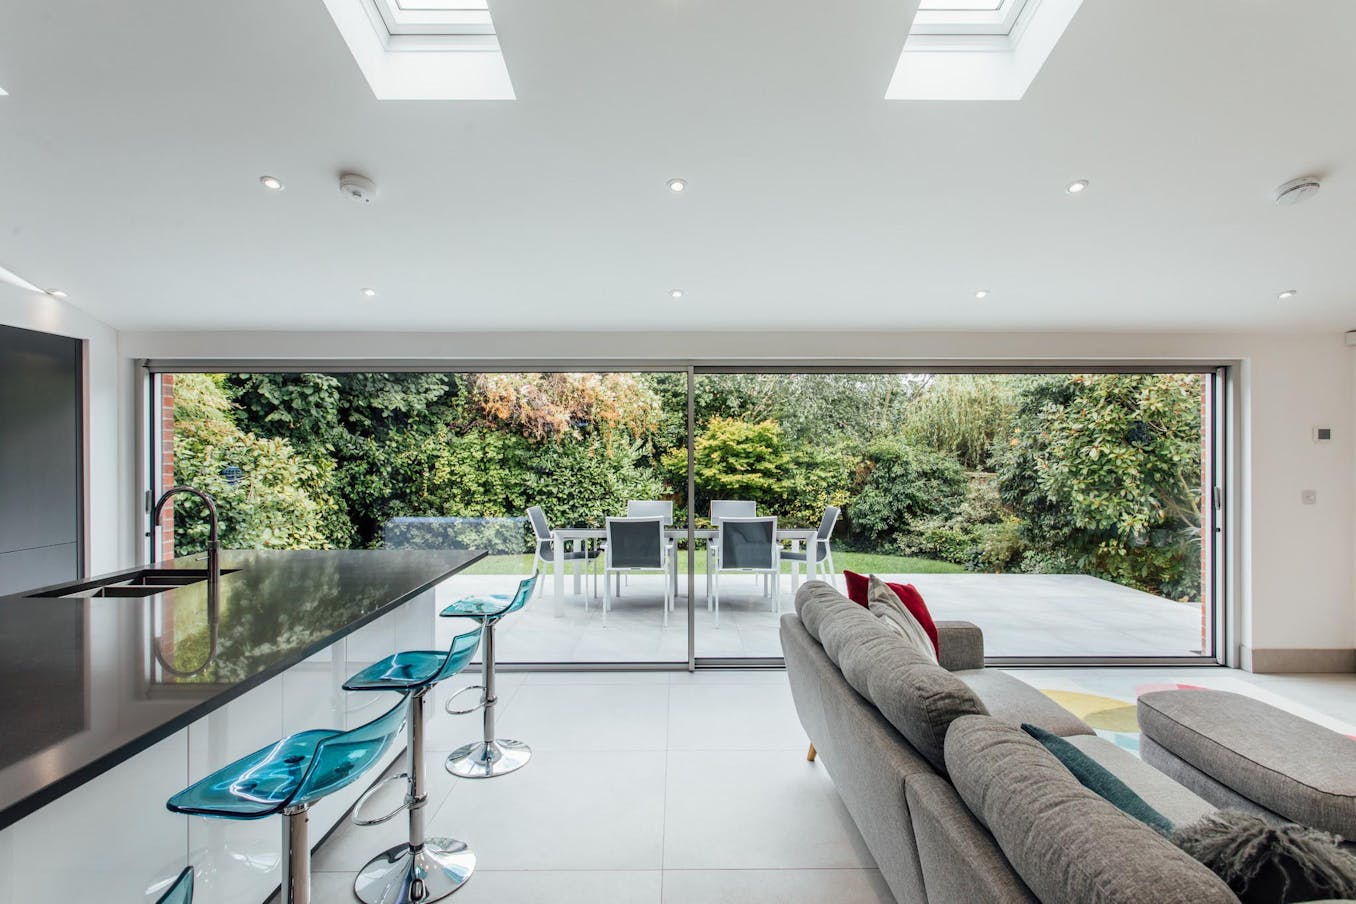 A modern kitchen and dining room with skylights and large opening glass walls